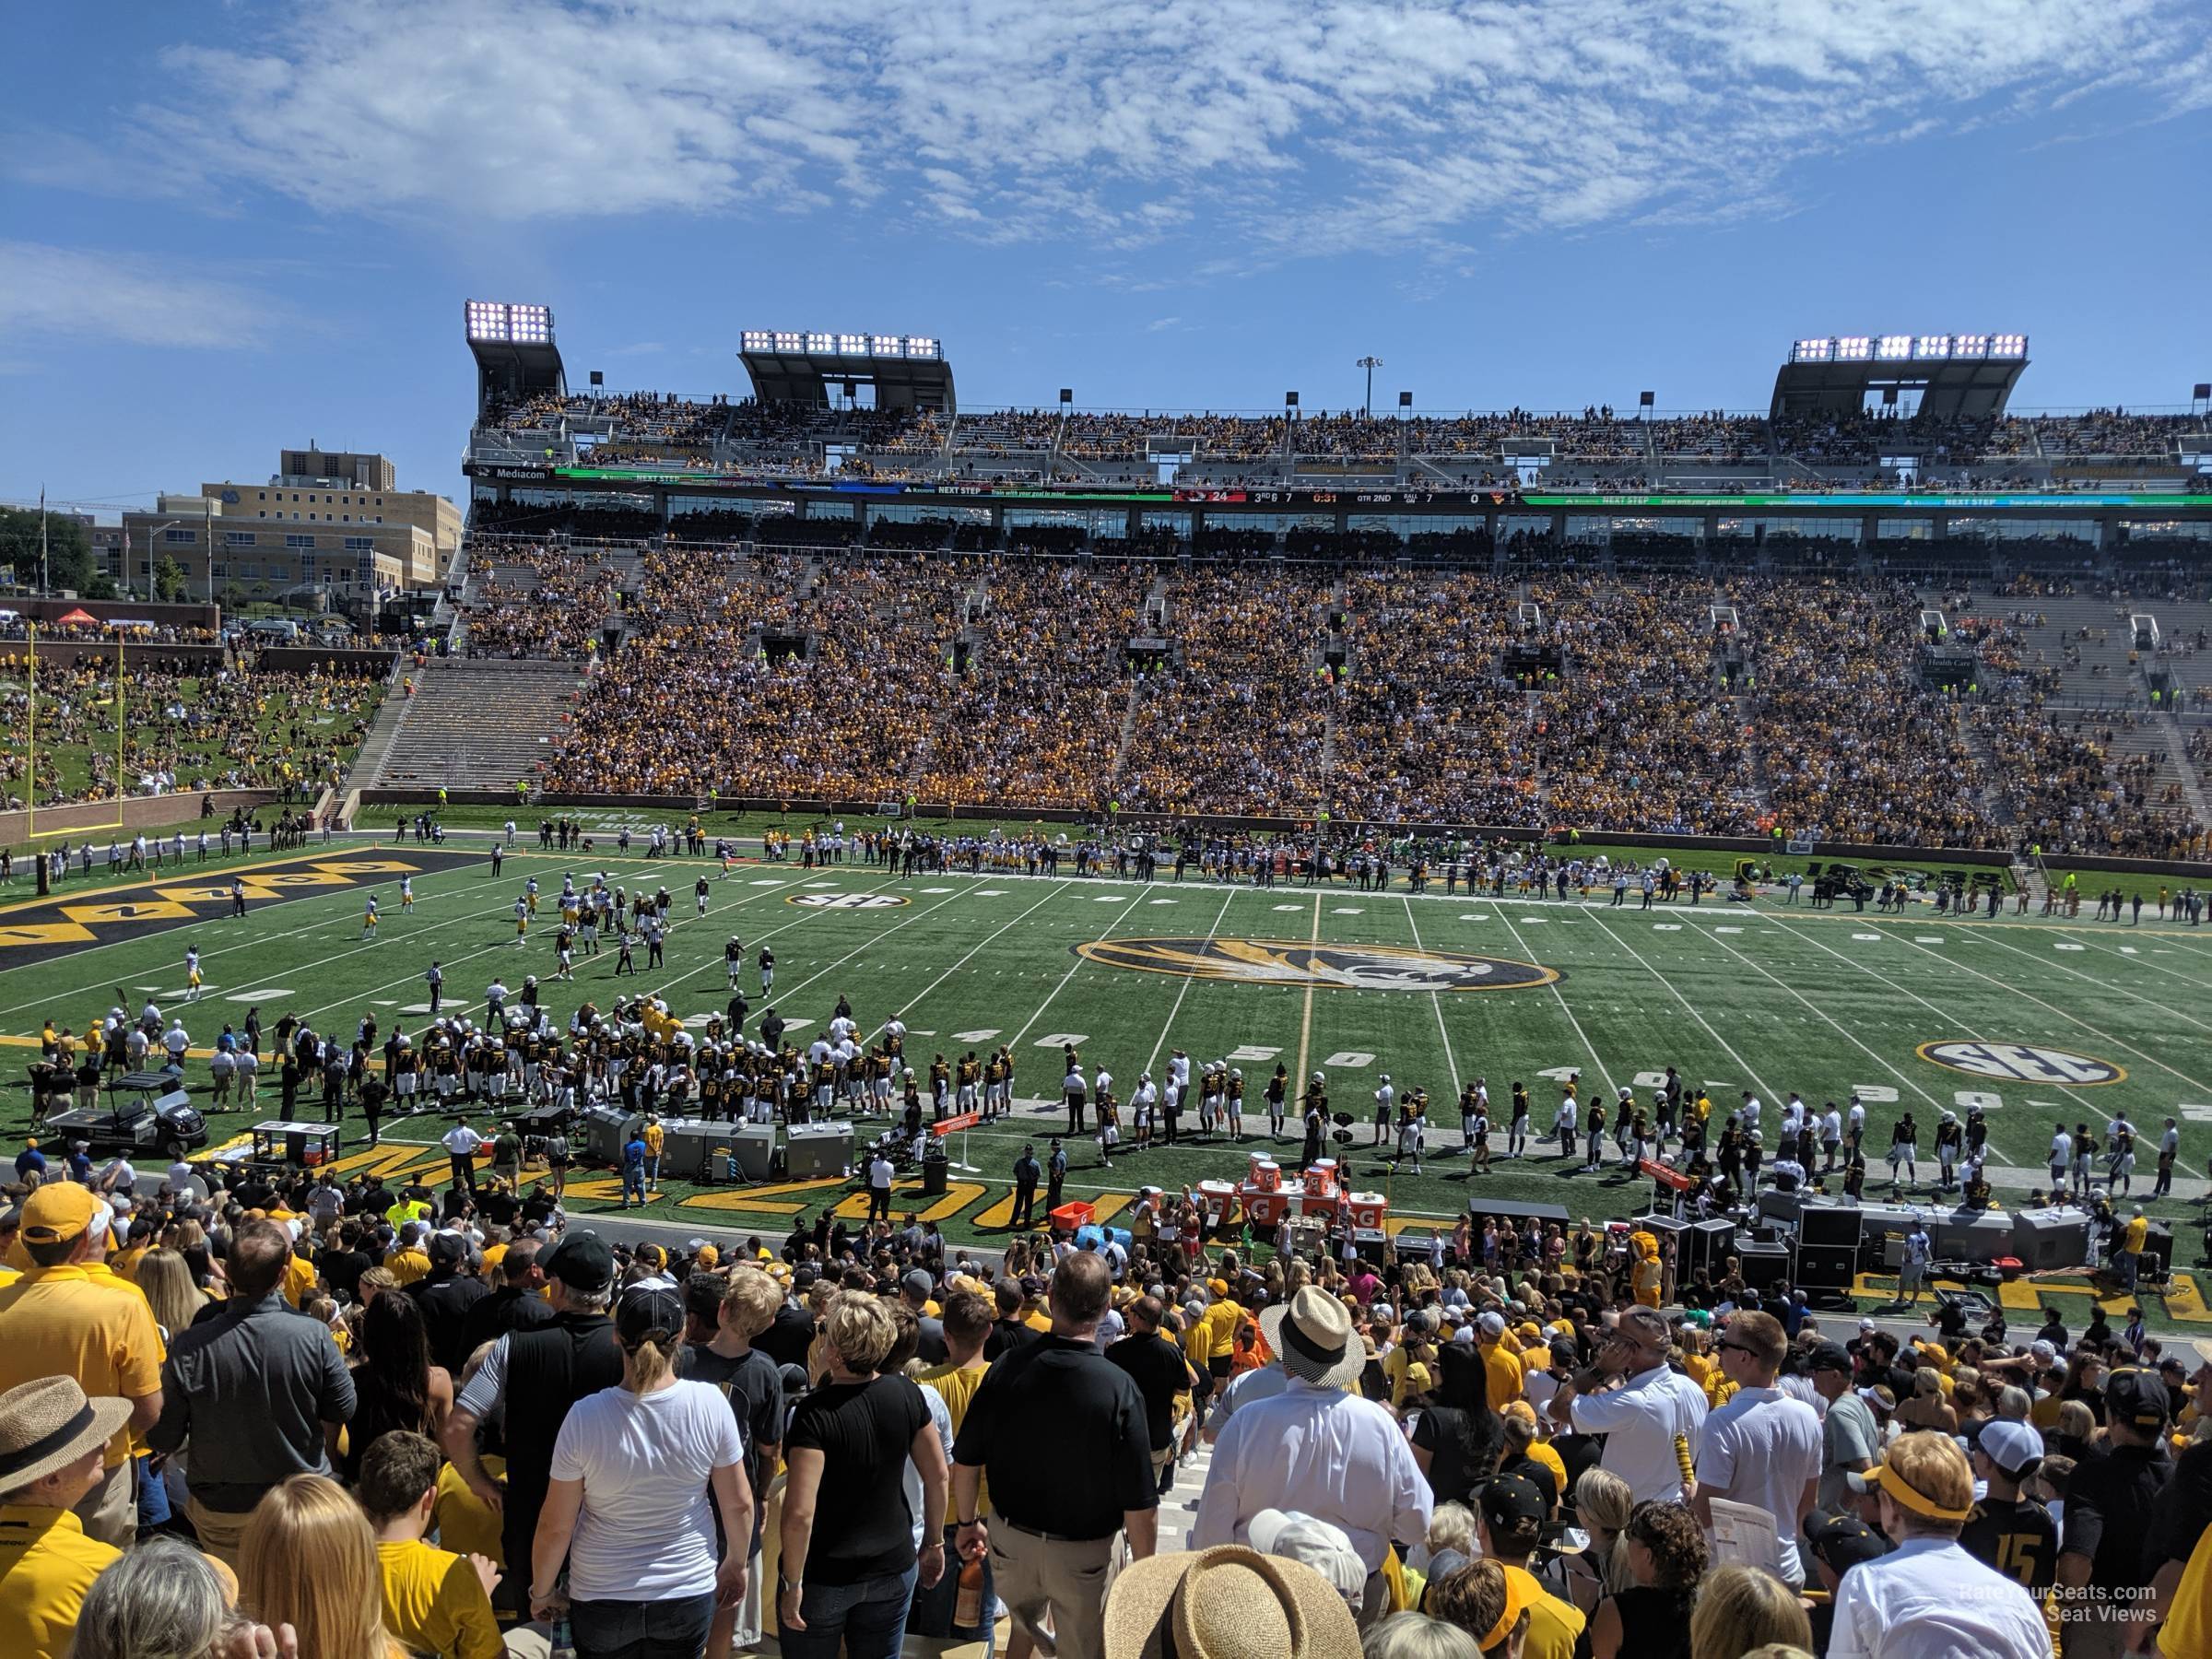 section 121, row 38 seat view  - faurot field